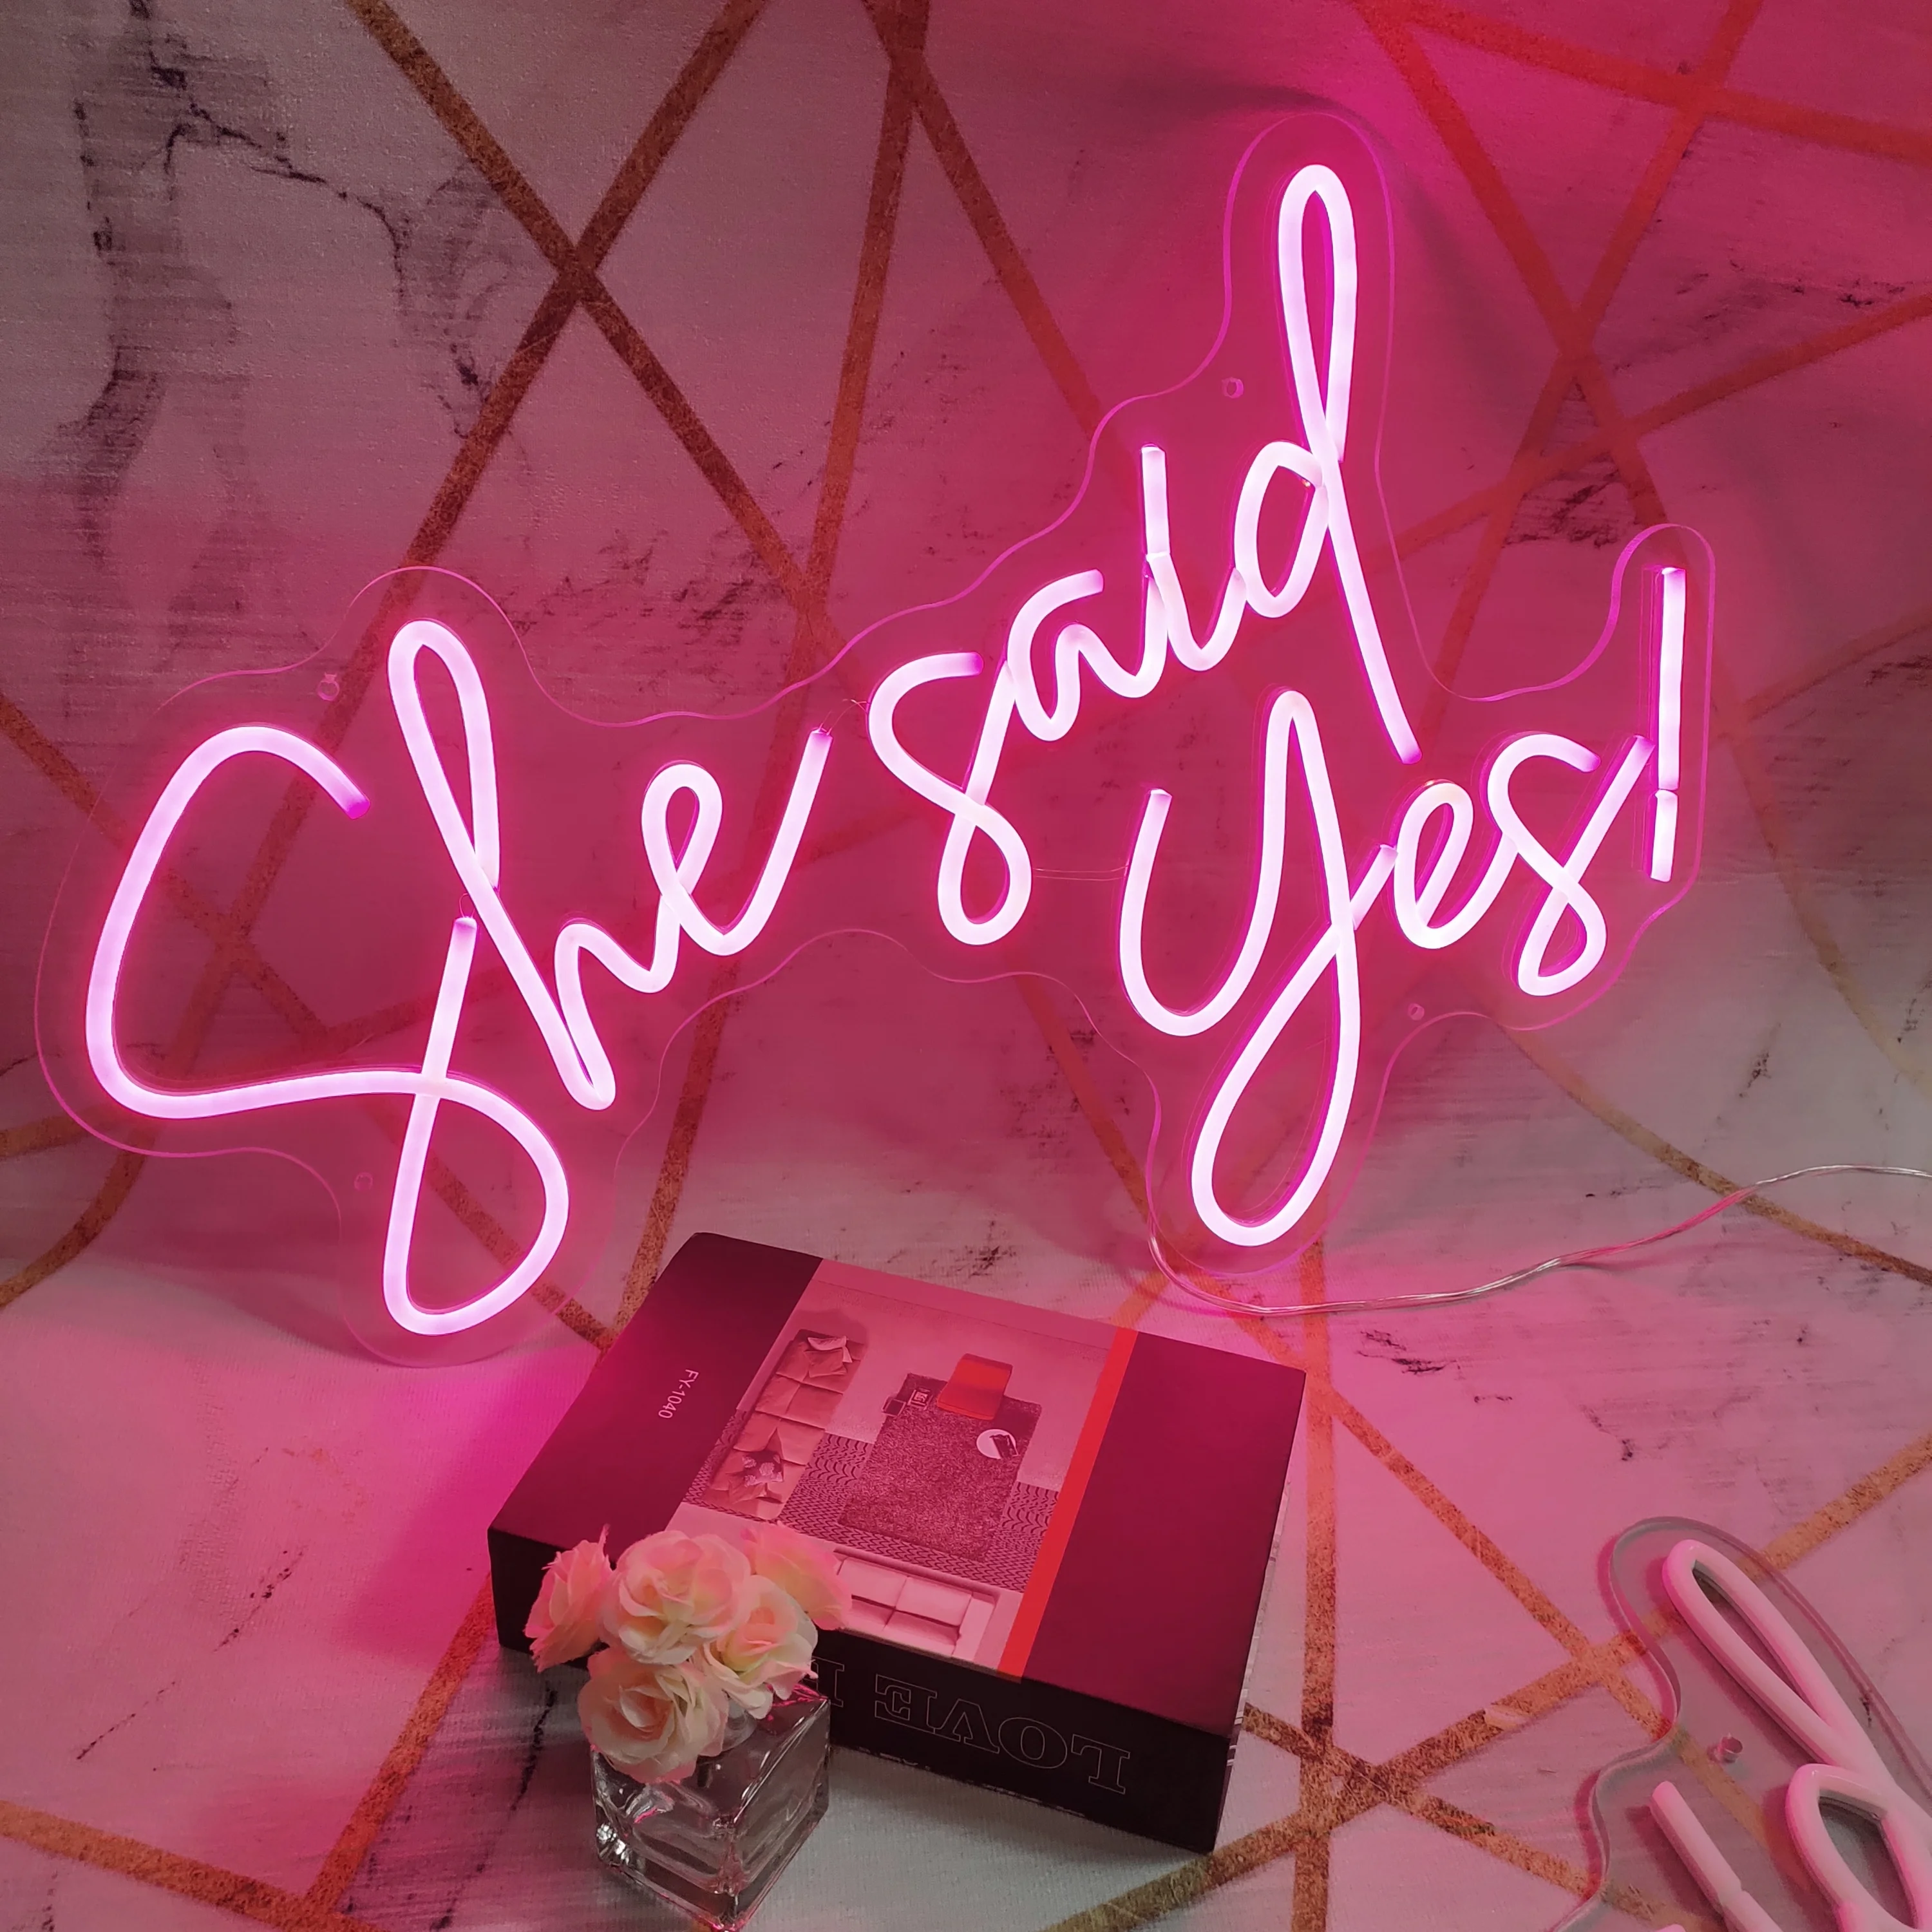 She Said Yes Neon Sign Flex Led Neon Light Sign Led Logo Custom Neon Sign Bride Party Marriage Proposal Engagement